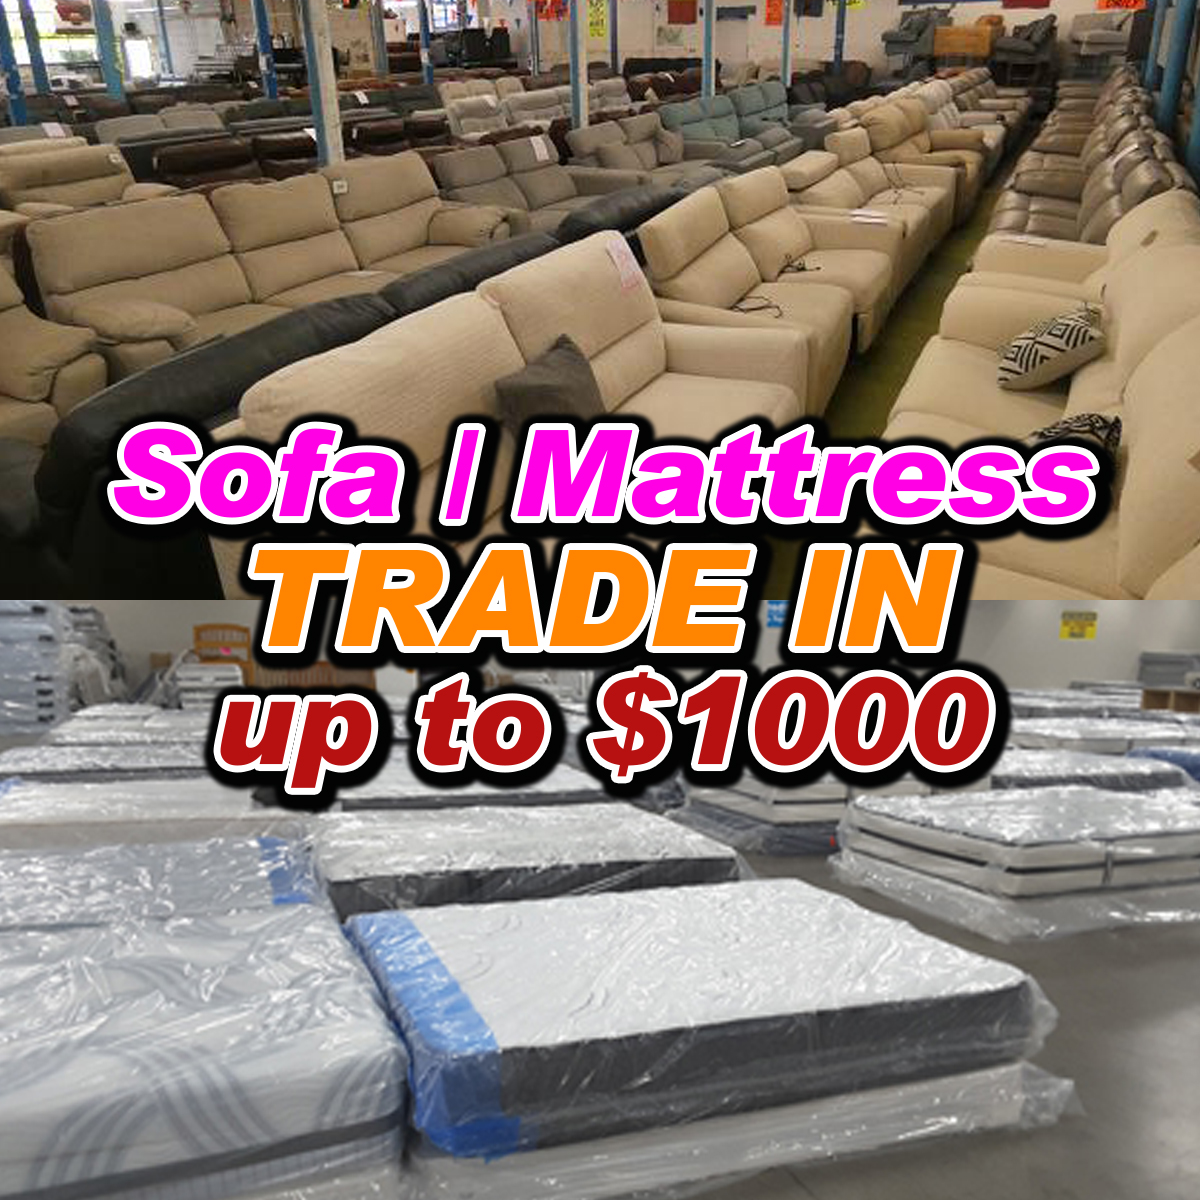 Lobang: Discover unbeatable deals at Nova Furniture Warehouse @ Changi on 11th-12th May only! Scratch and win with every purchase, enjoy buy 1 mattress get 1 free, and trade-in your old furniture for up to $1000. Plus, tentage sale starts from just $1! - 5